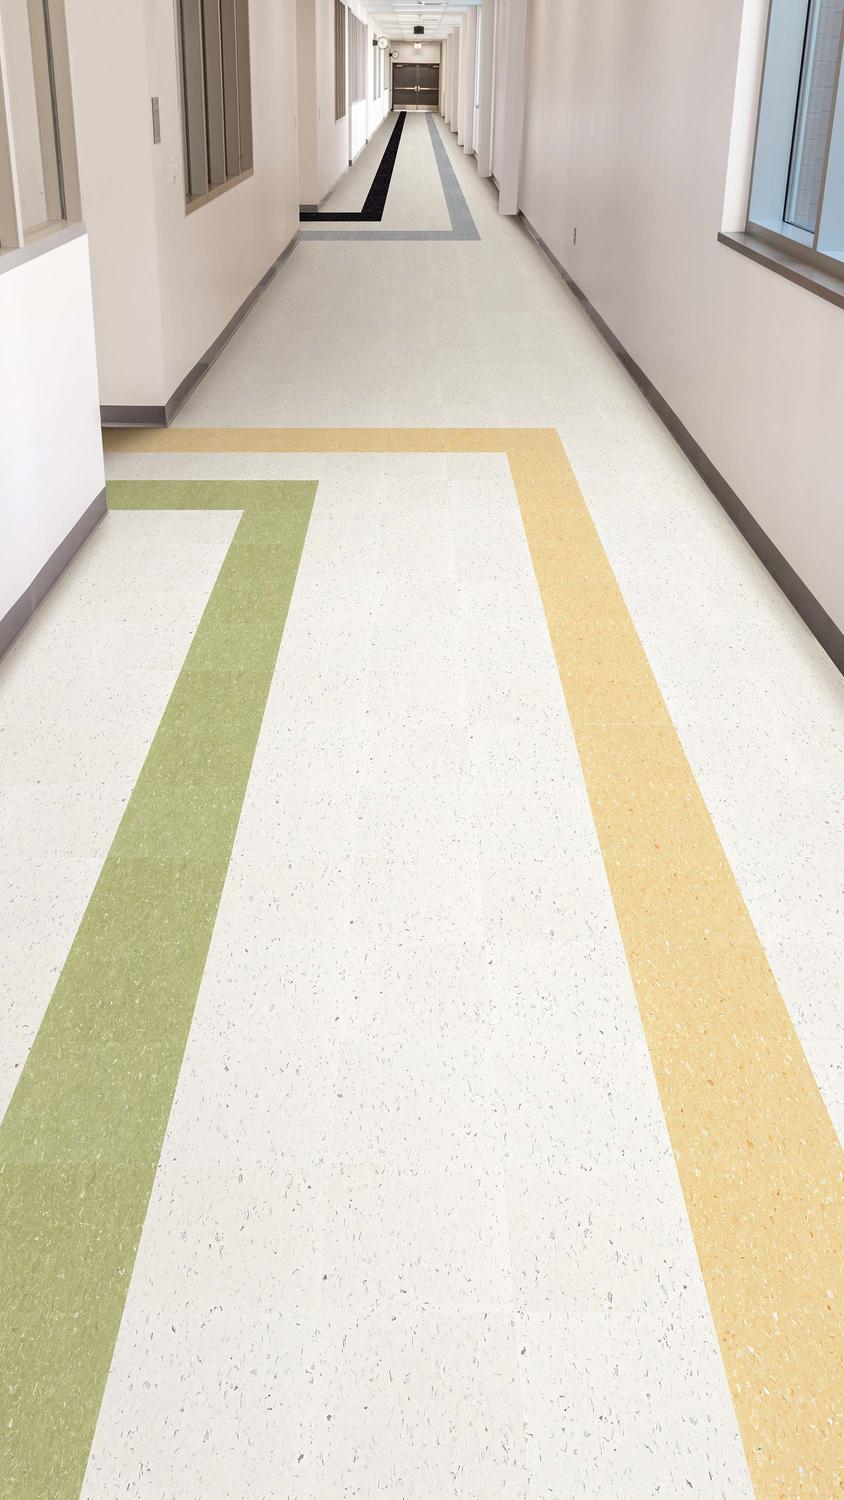 What's The Best Floor Pad for VCT (Vinyl Composition Tile